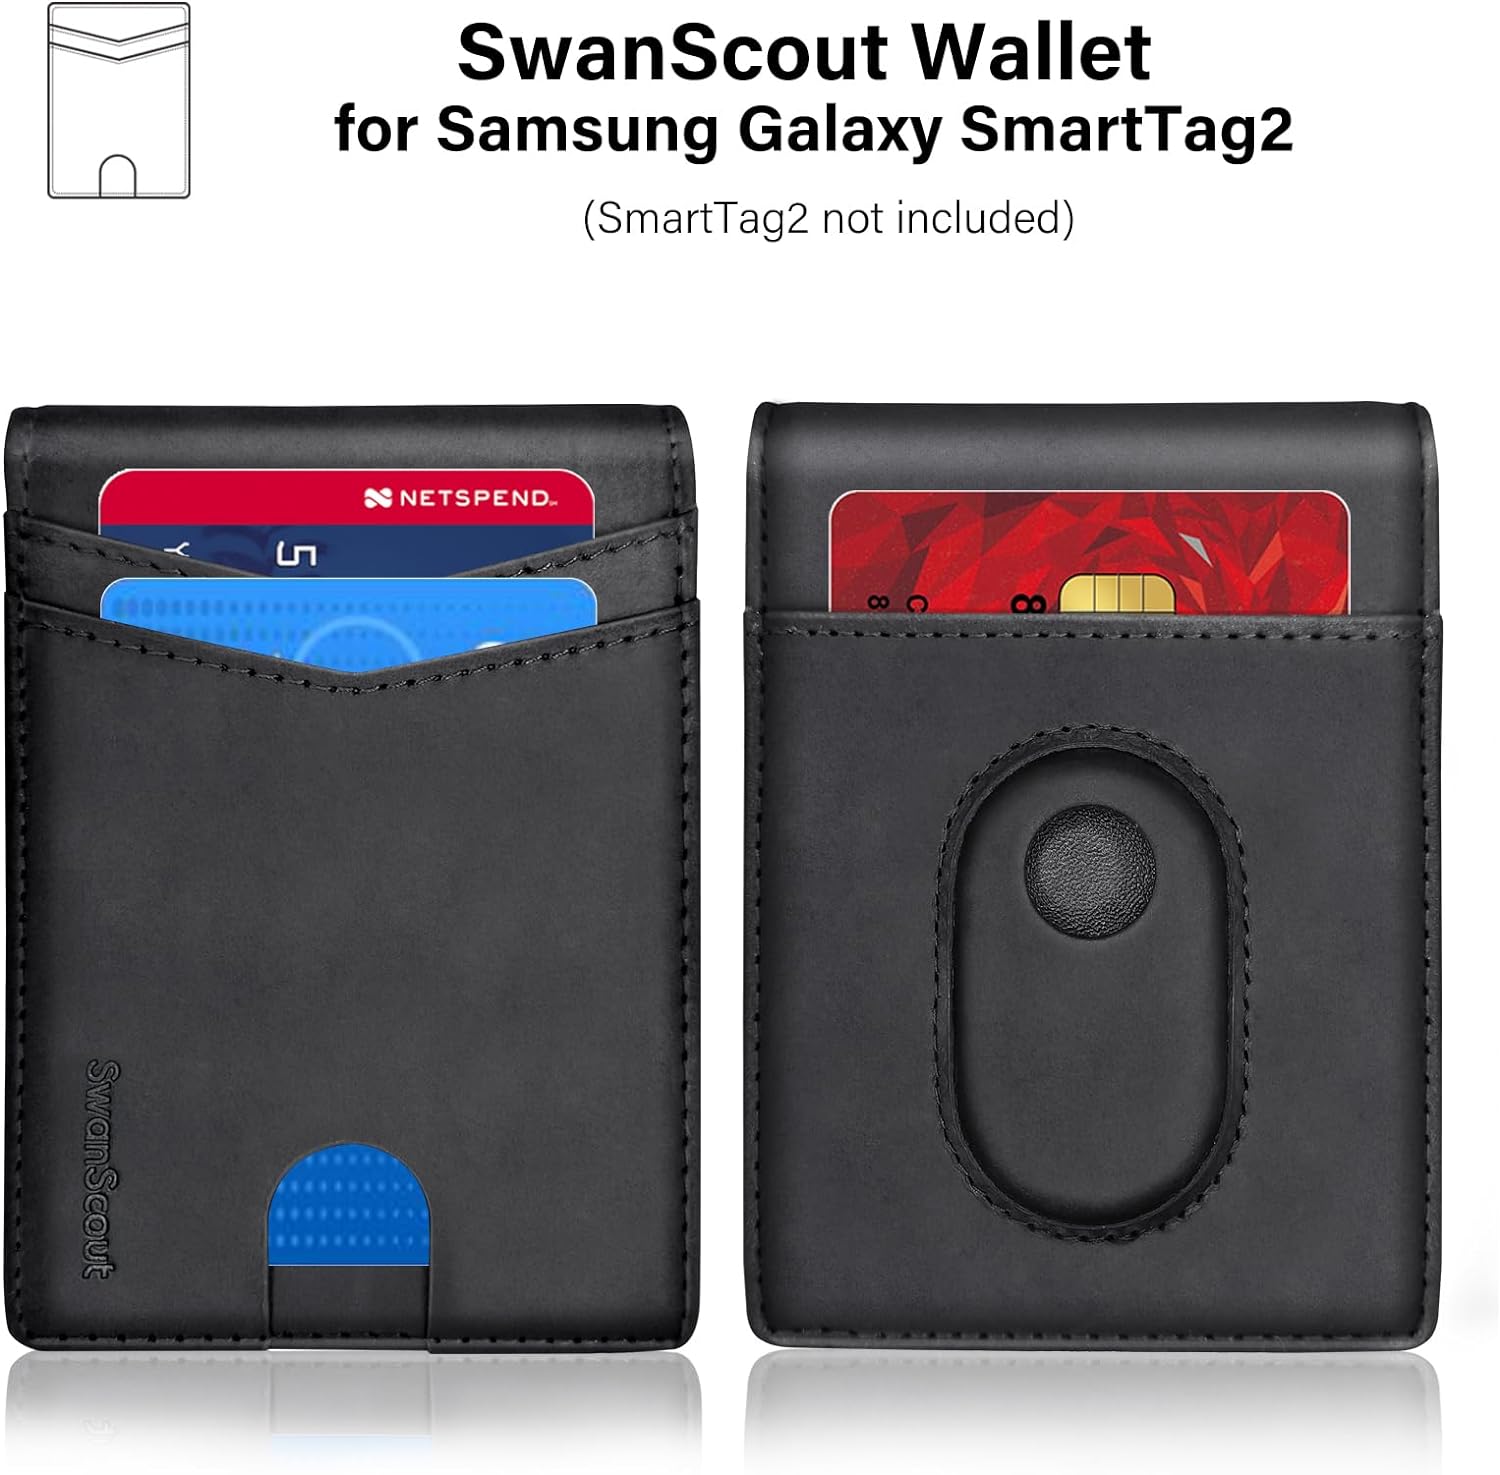 SwanScout 105S Wallet Integrates a Tracker Holder, Enabling You to Track the Wallet and Reduce the Risk of Losing it. SwanScout 105S Wallet for SmartTag2 Compatible with SmartTag2 Not Includes SmartTag2 With Innovative Design on Function & Stylish Design on Appearance, Our Wallets Can Both Meet Your Daily Use and Match Your Fashion Style.